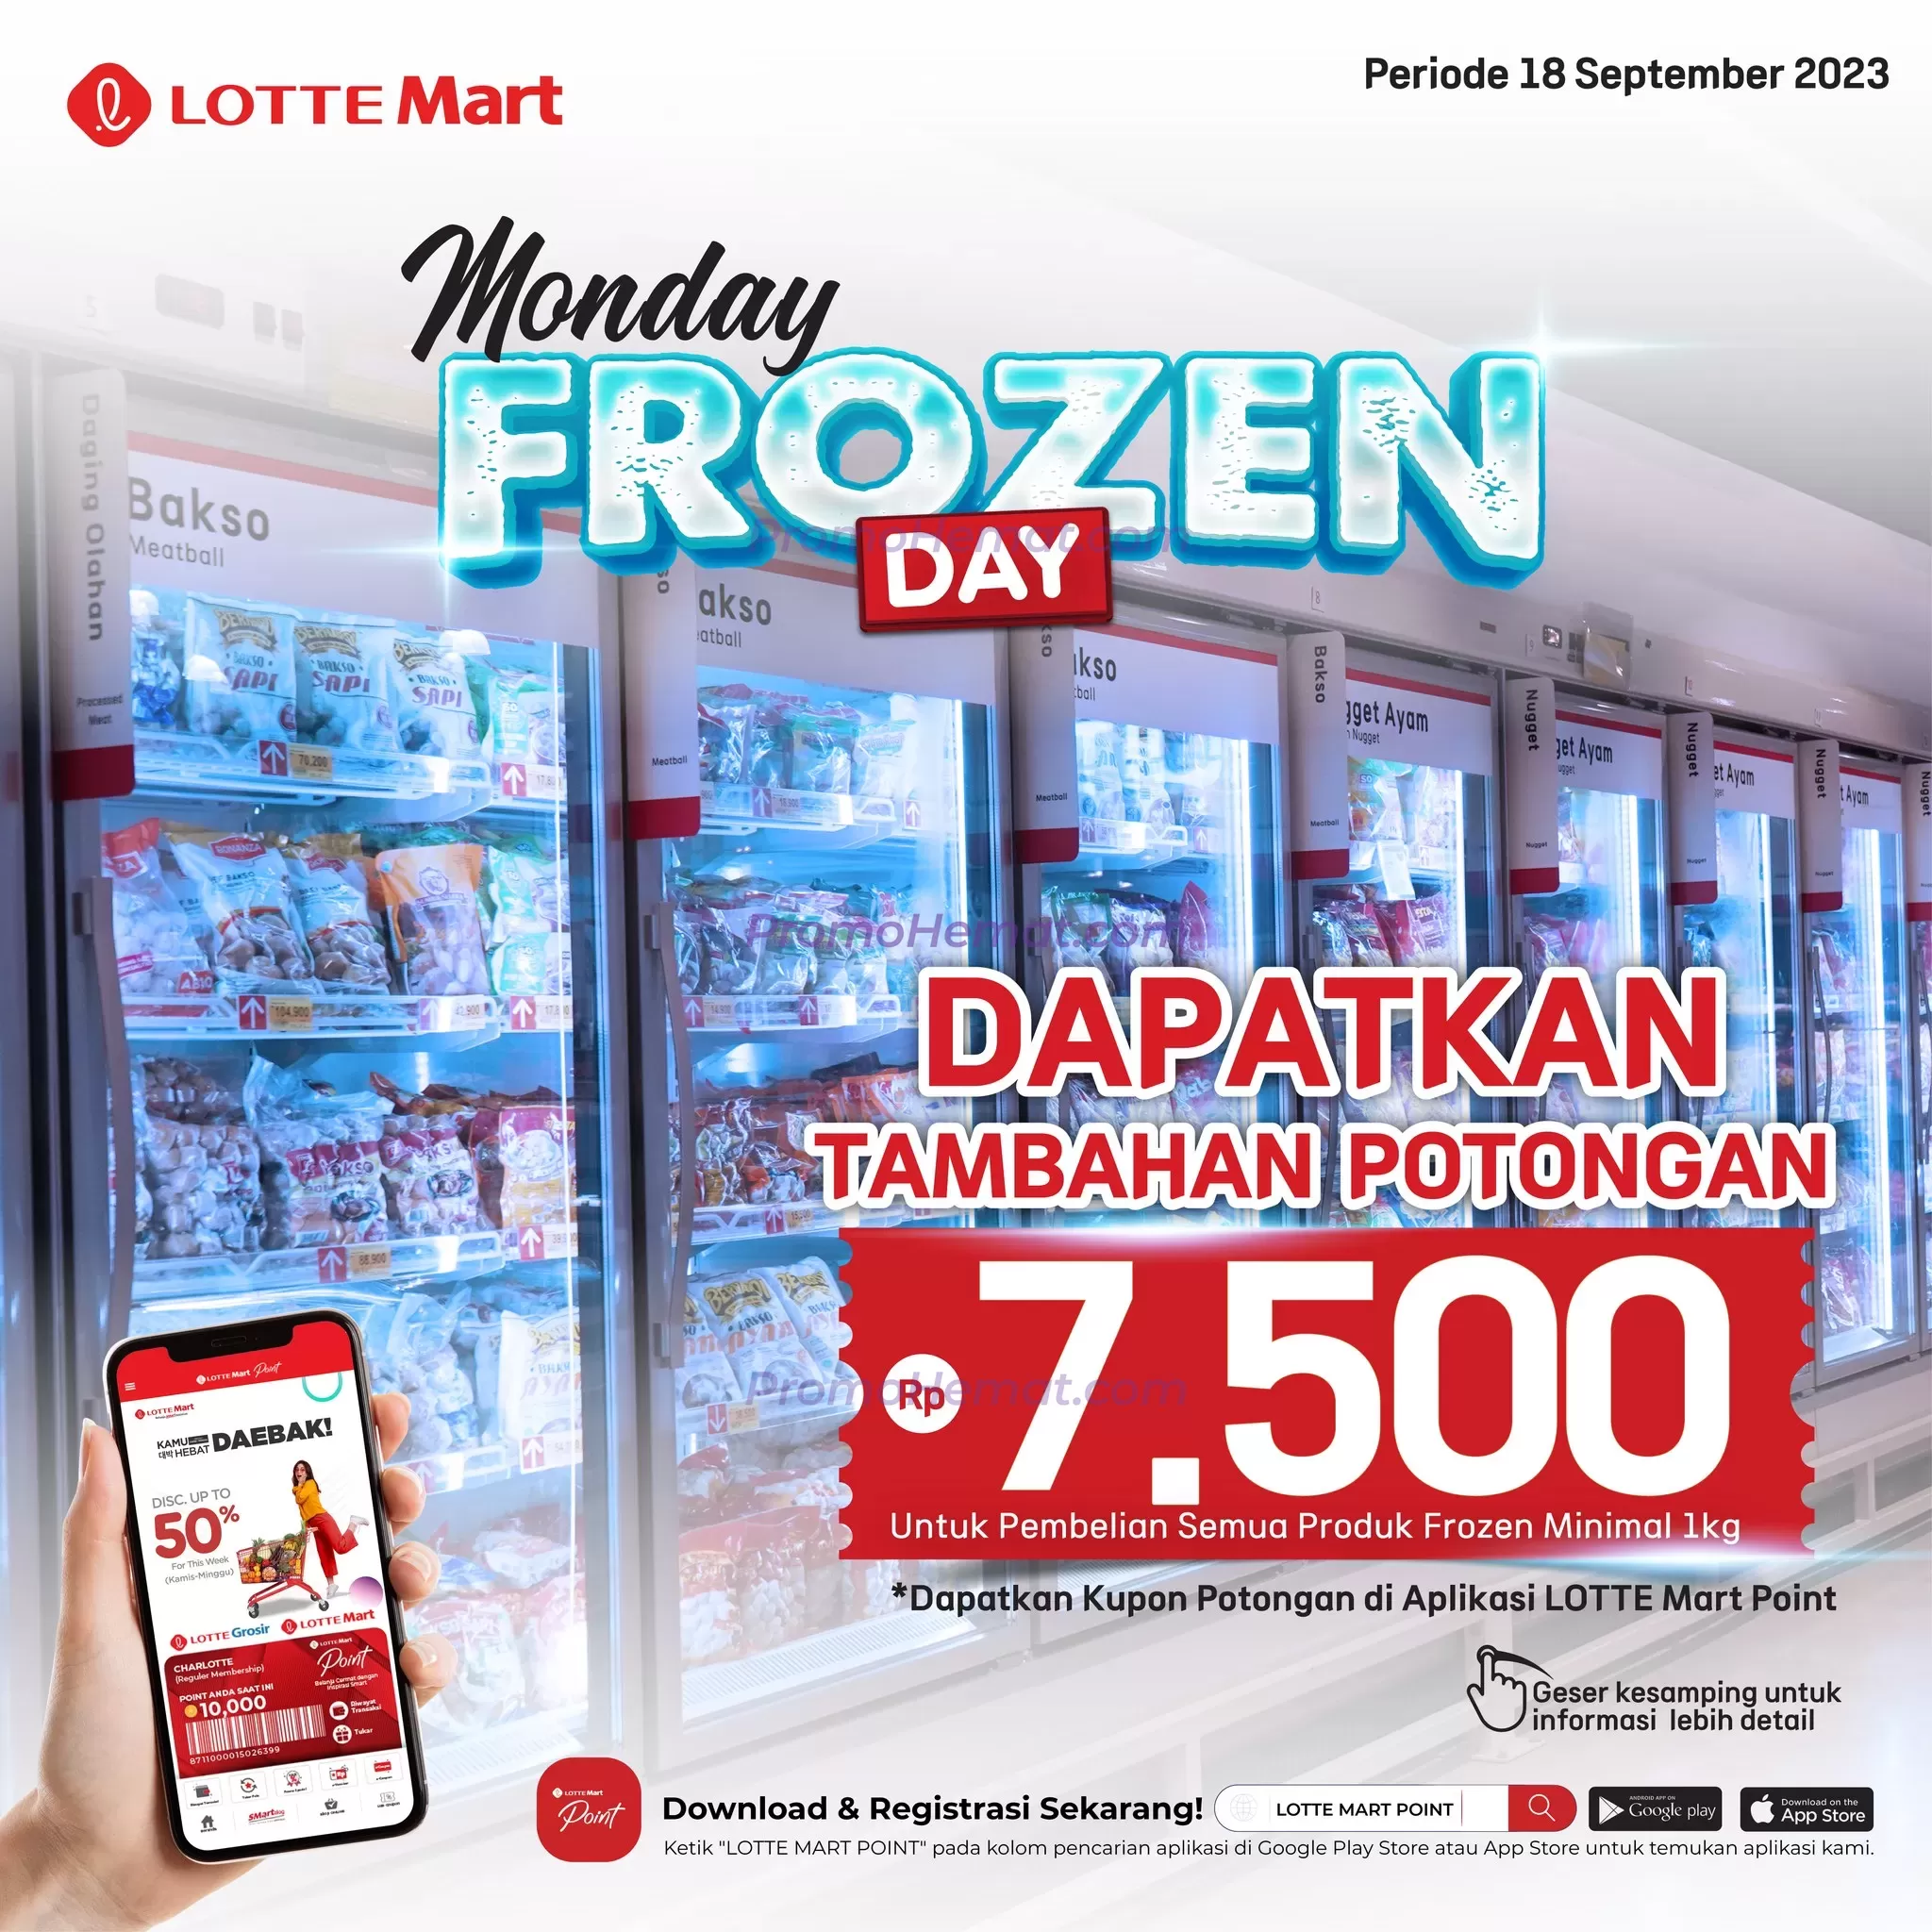 Promo Frozen Day Lotte Mart Periode 18 September 2023 image_1